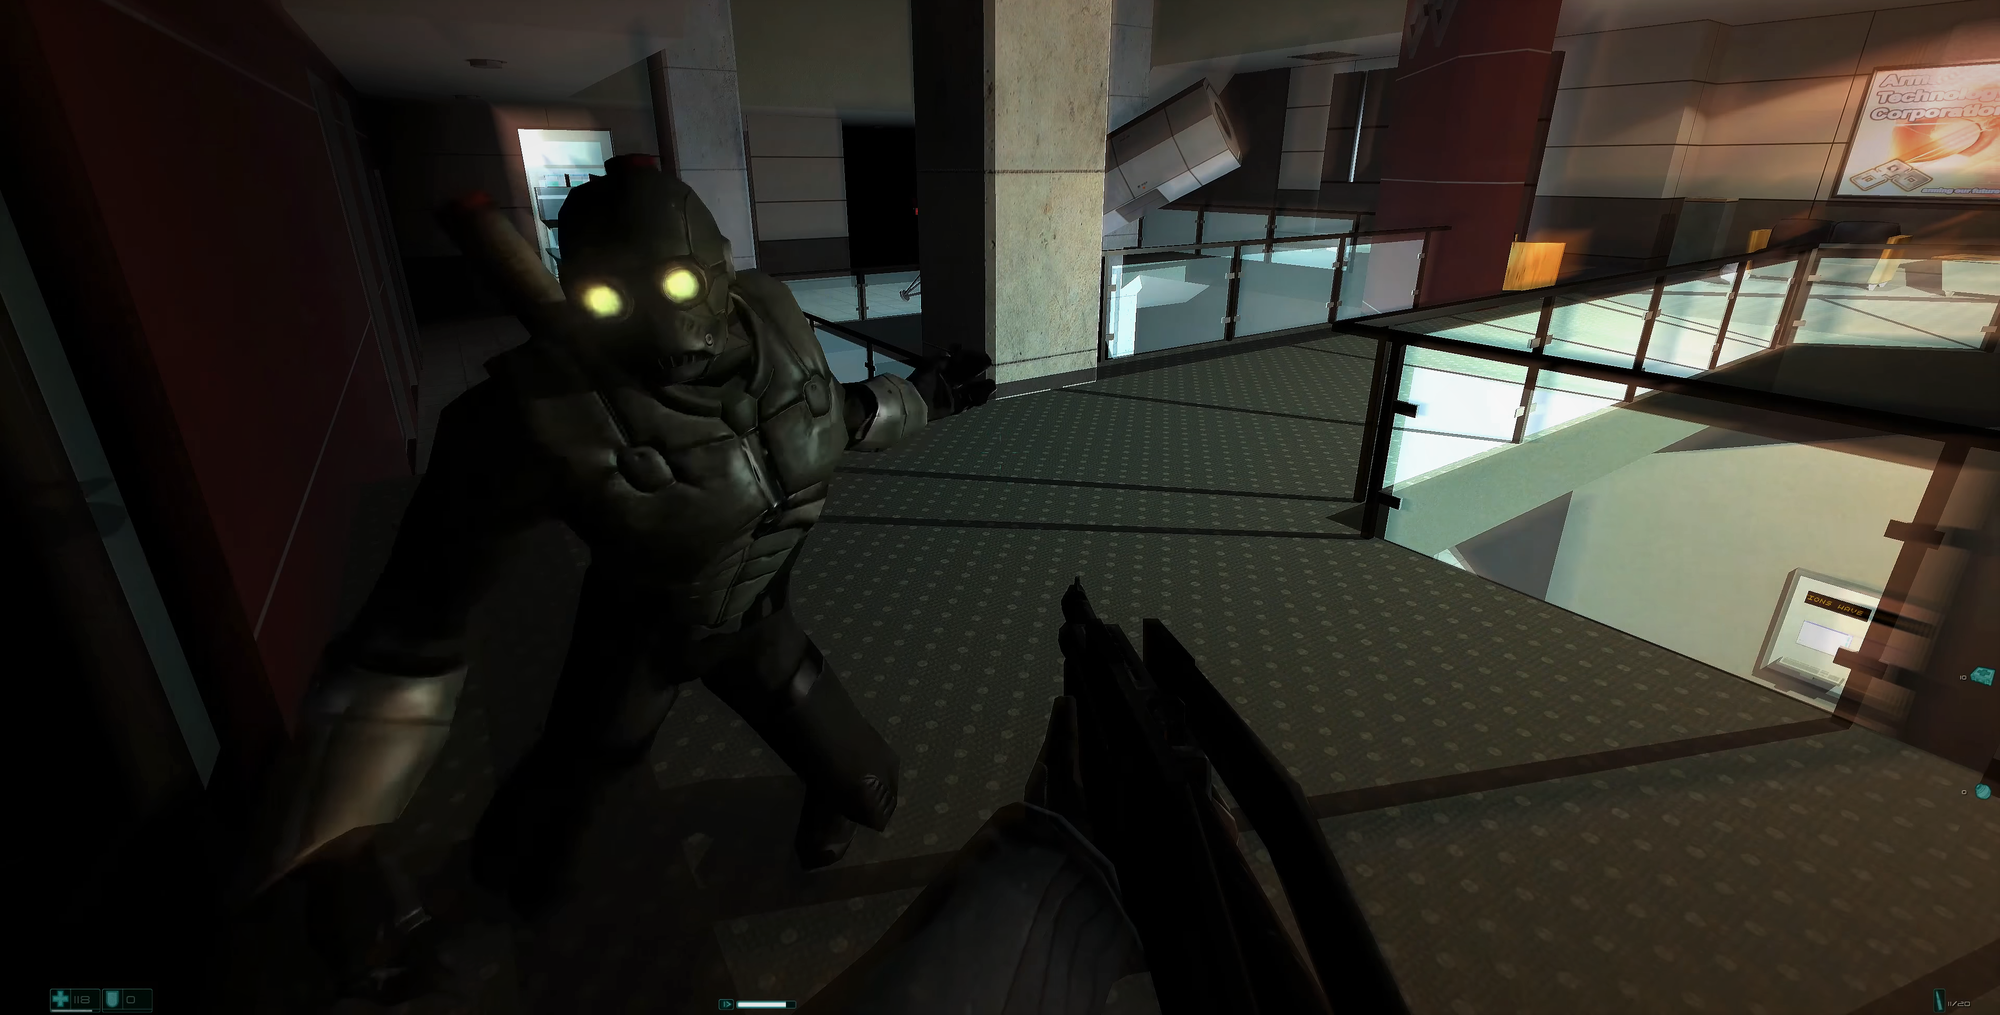 Screenshot from the game. The player is standing on a walkway and an enemy wearing a gas mask is approaching them.